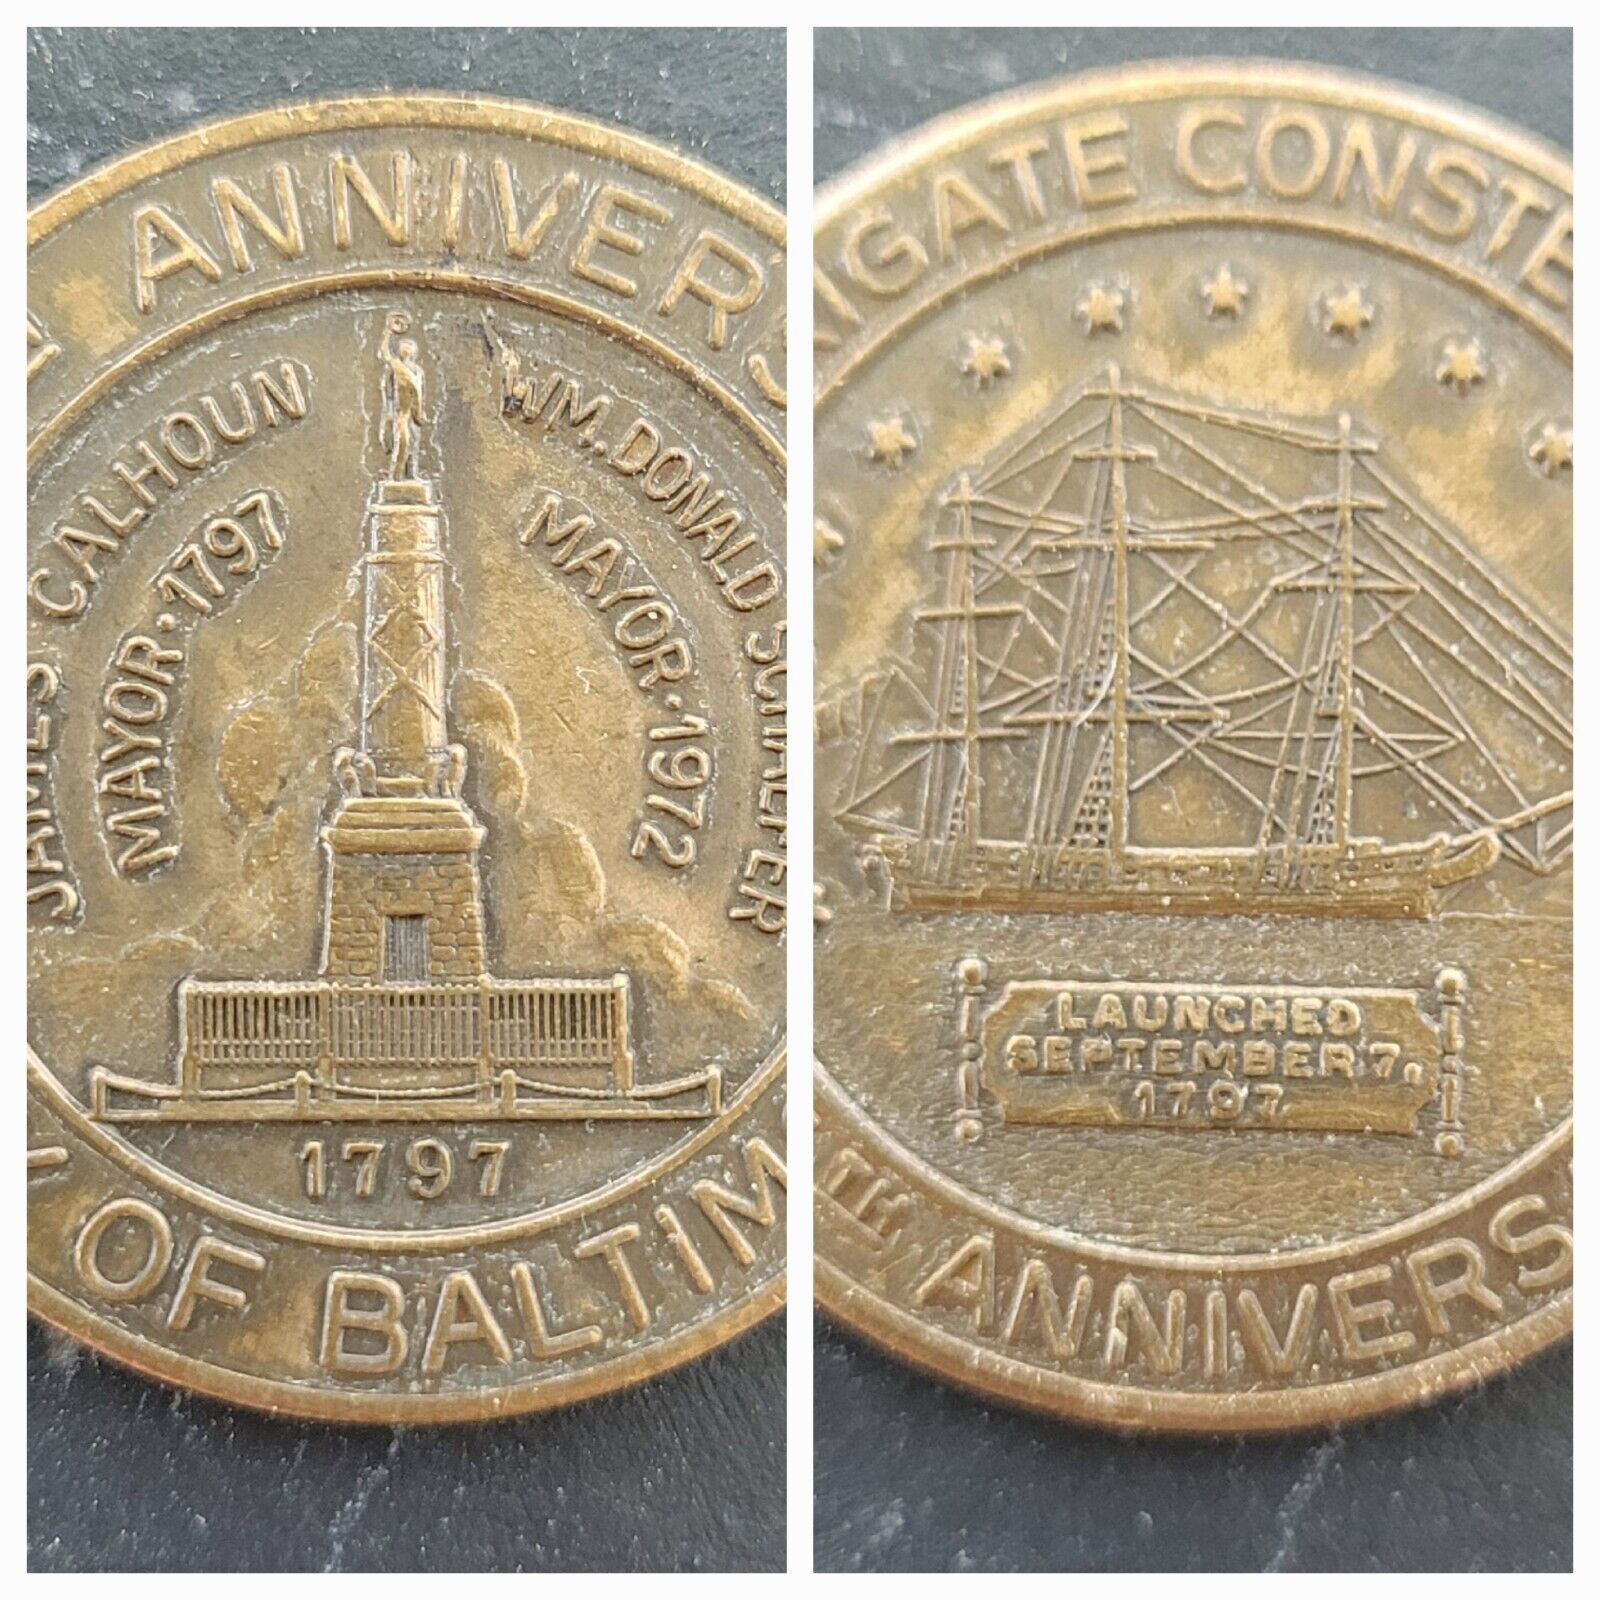 1972 Vintage City of Baltimore USS Constellation 175th Anniversary Coin